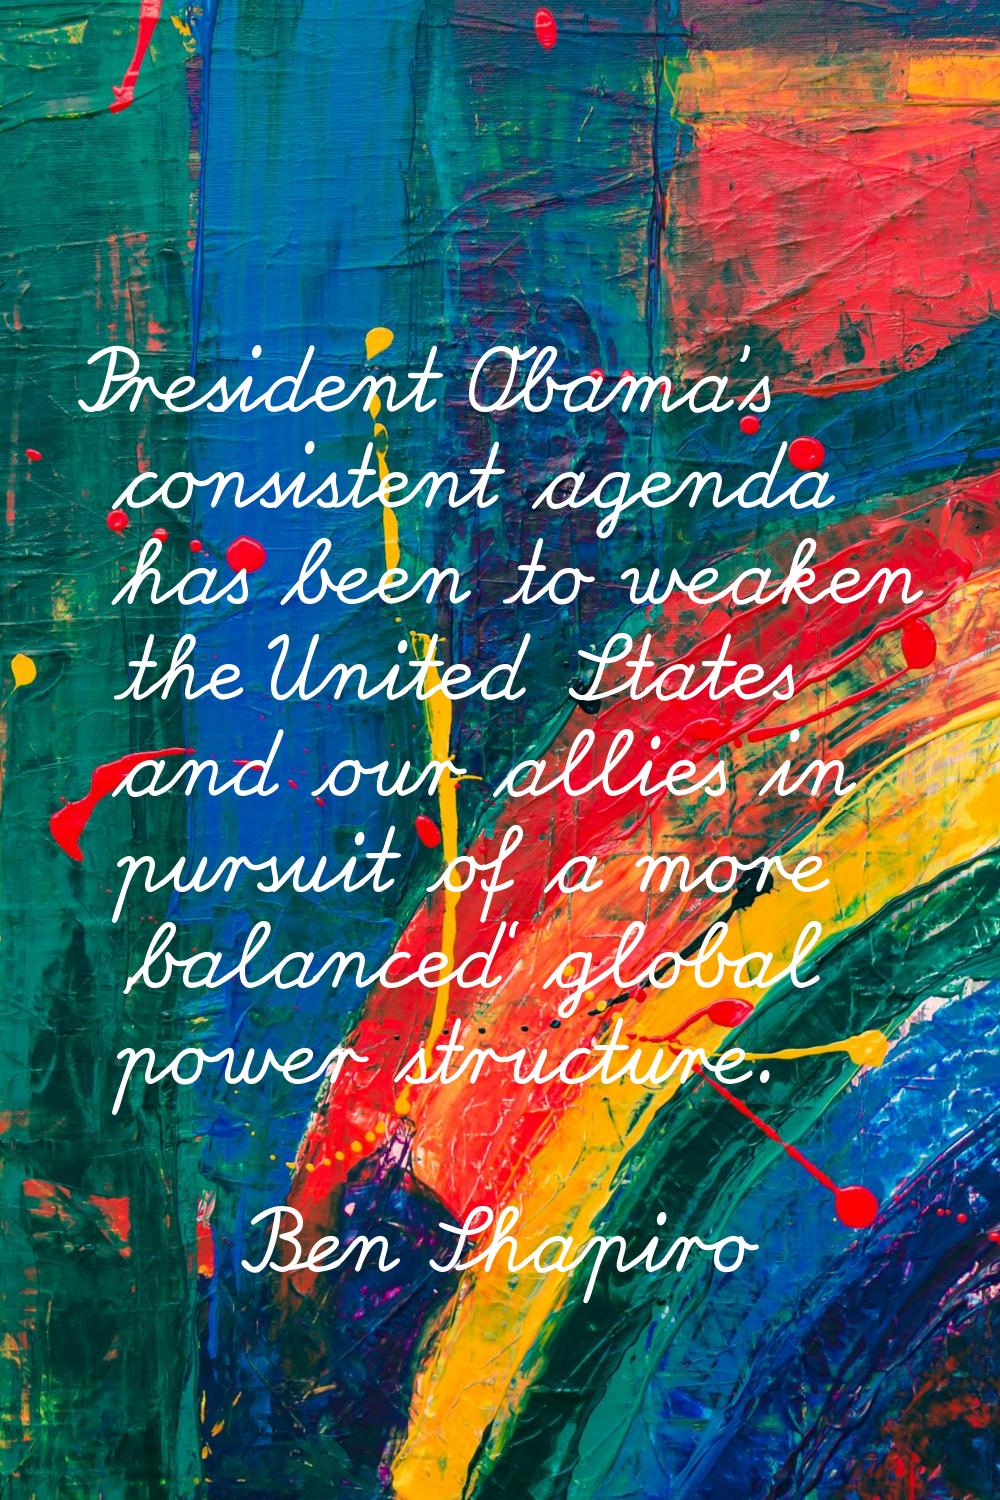 President Obama's consistent agenda has been to weaken the United States and our allies in pursuit 